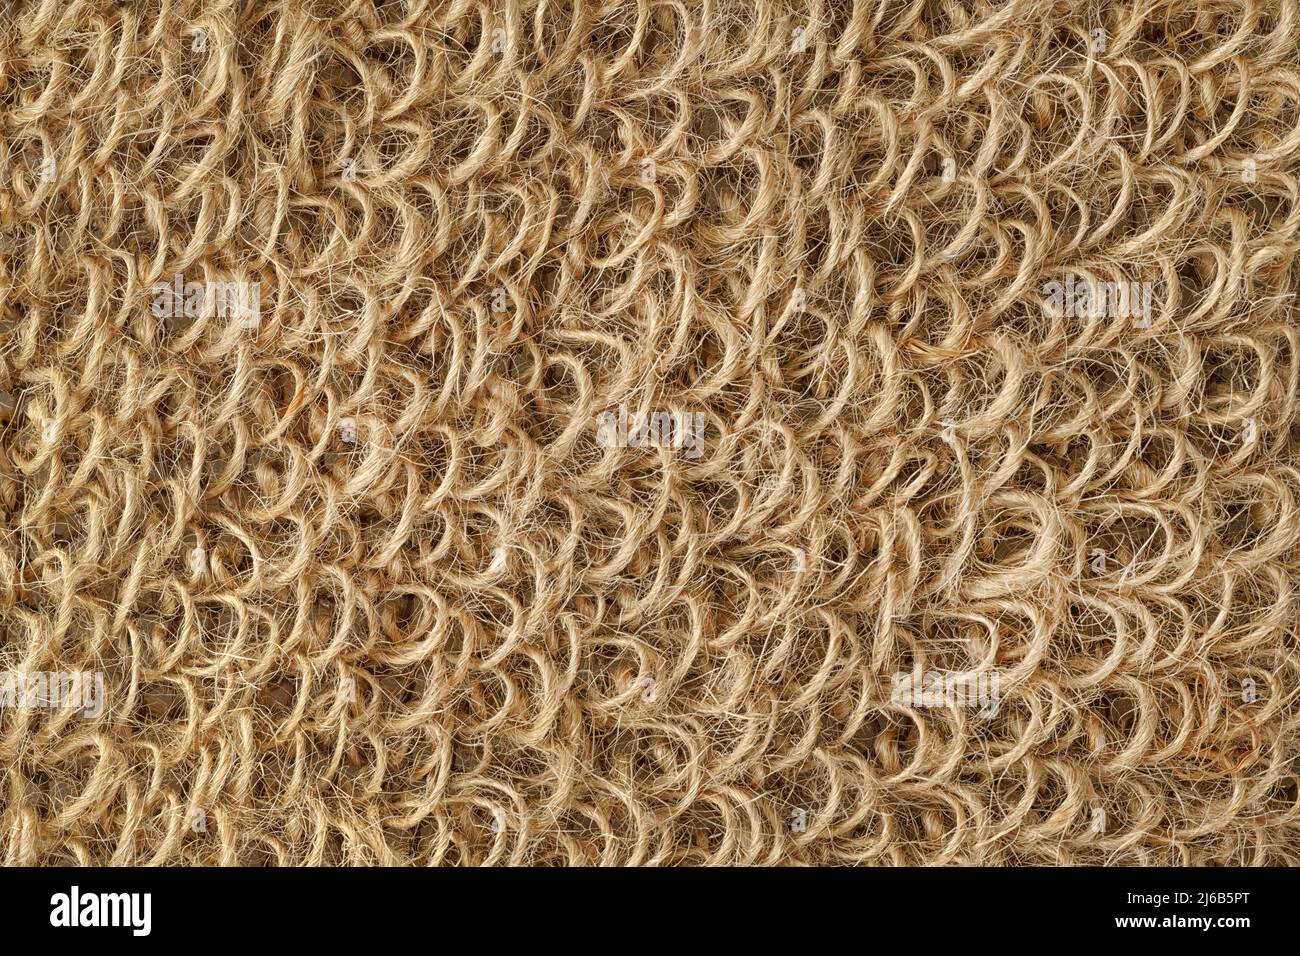 Jute washcloth extreme close up for texture and background. Textured surface made of rough rope loops Stock Photo